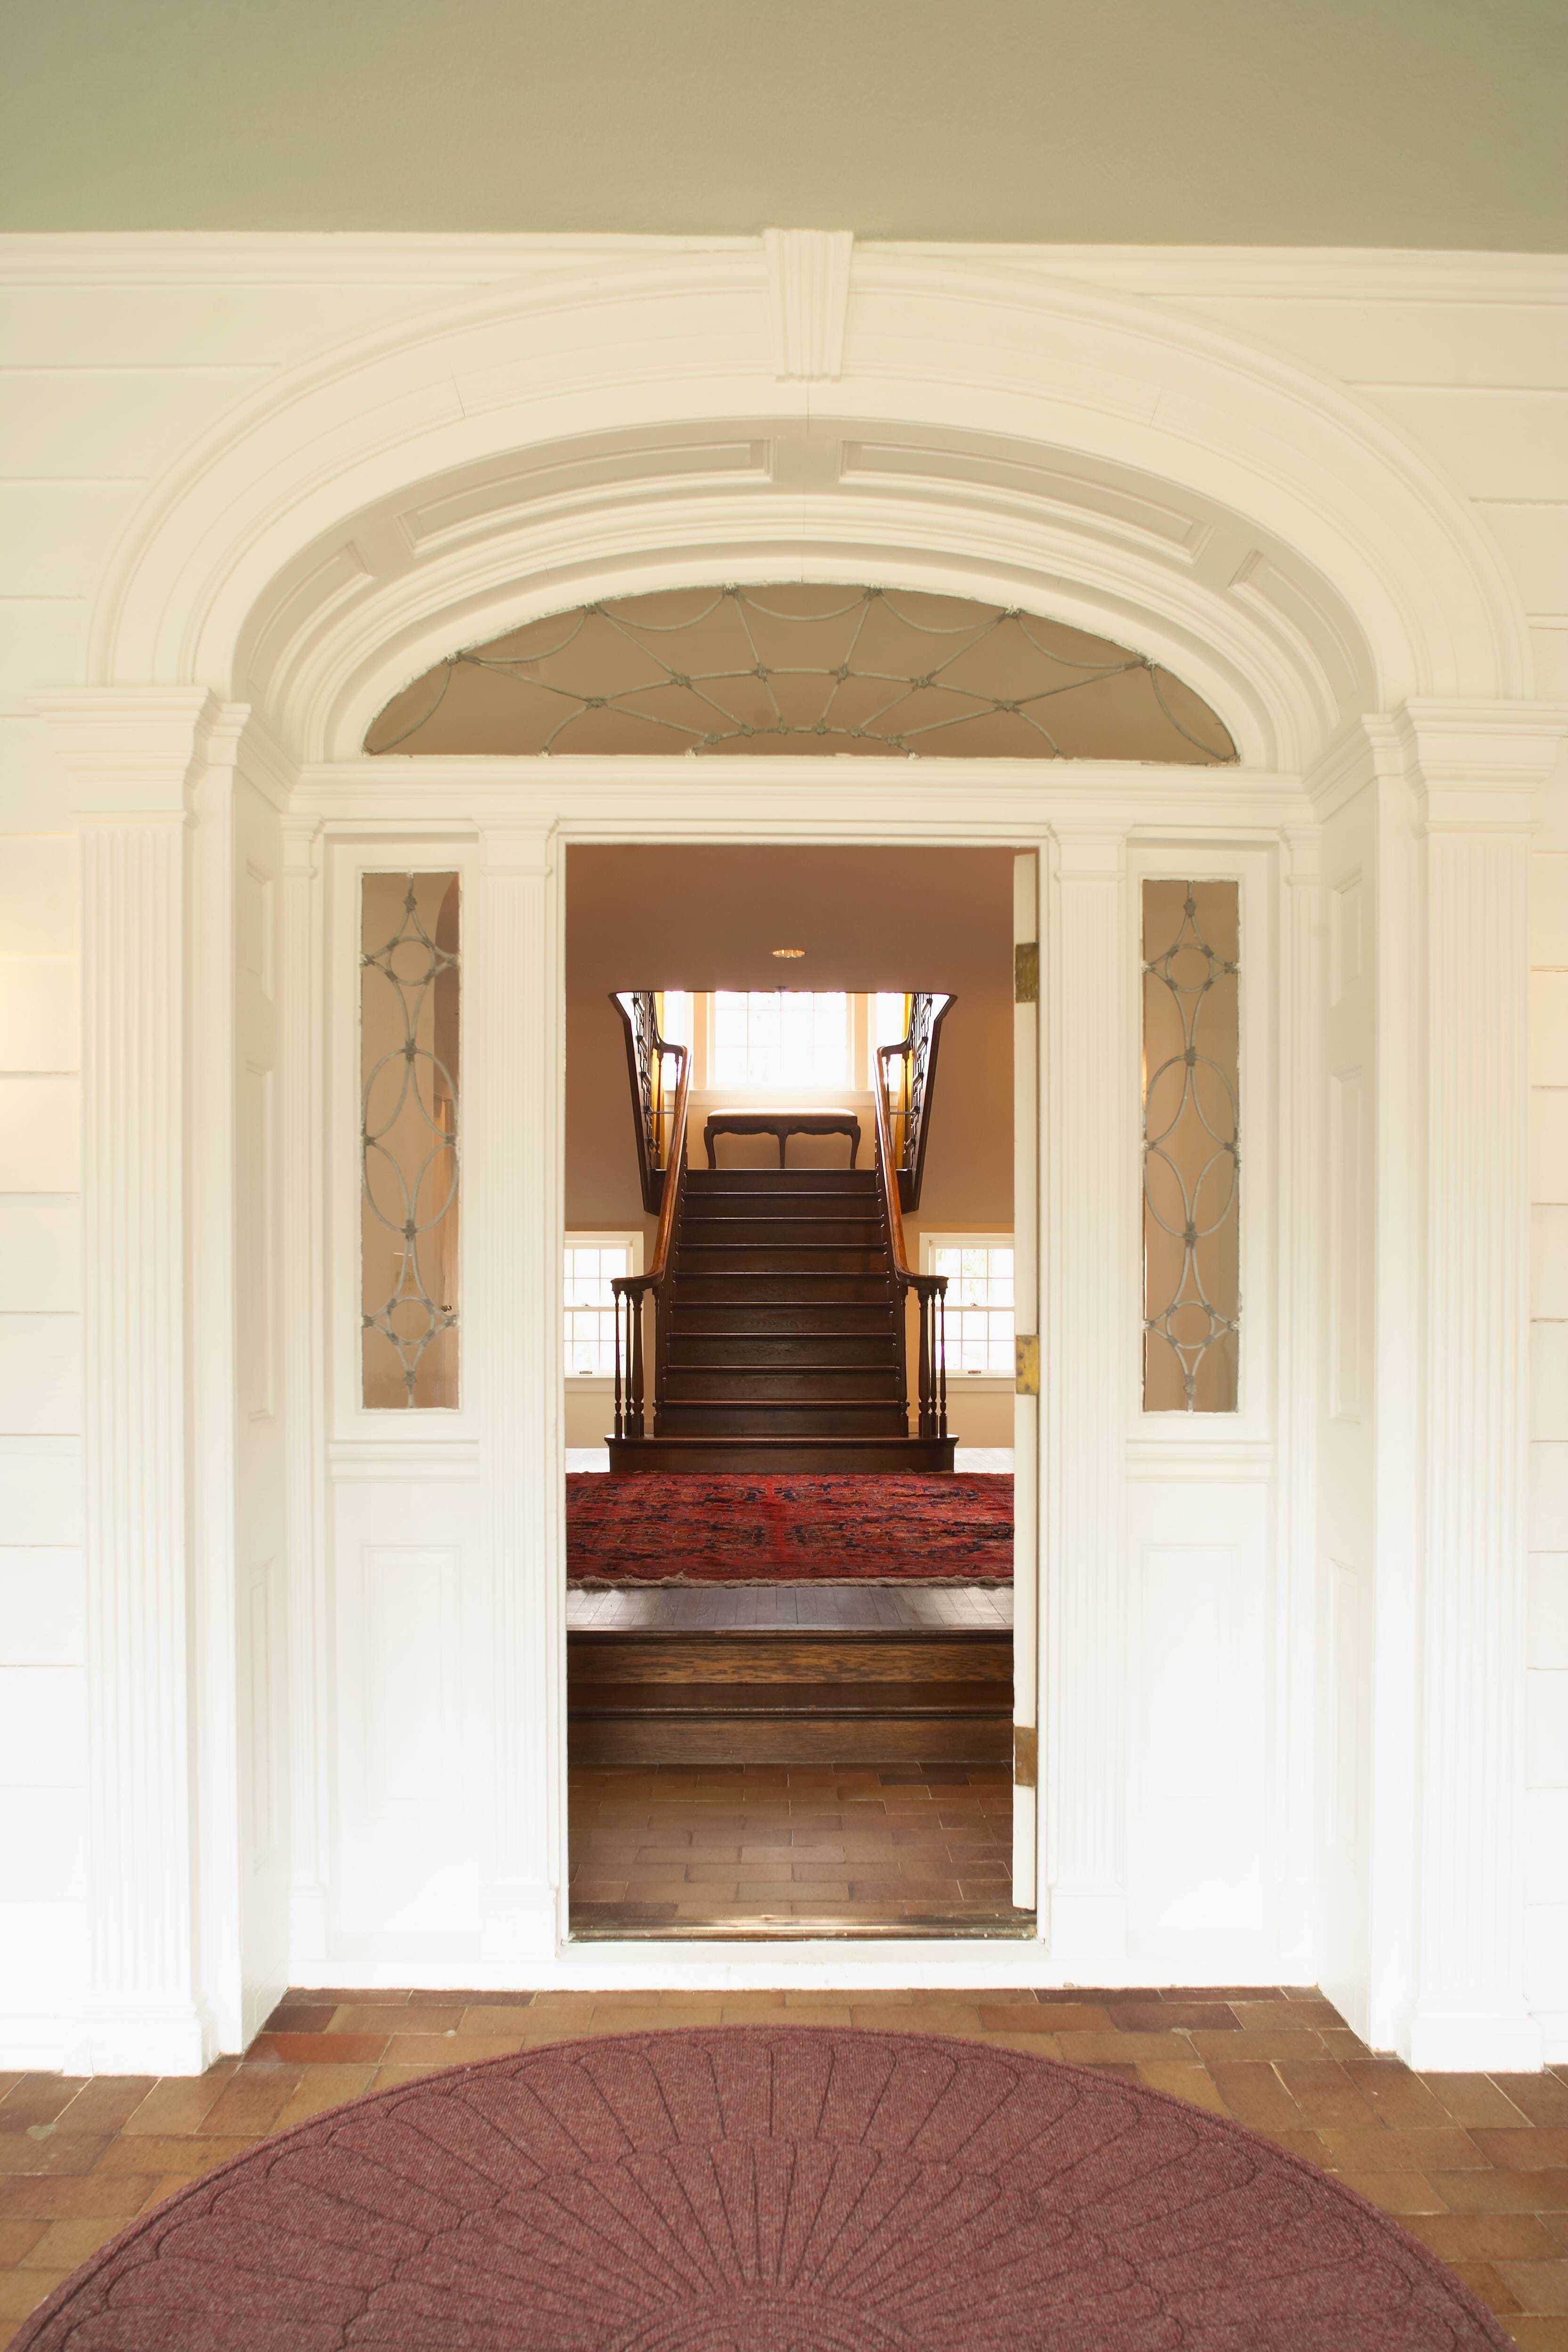 A crisp, white front entrance of the manor with the door opened and a view of the large, wooden staircase.